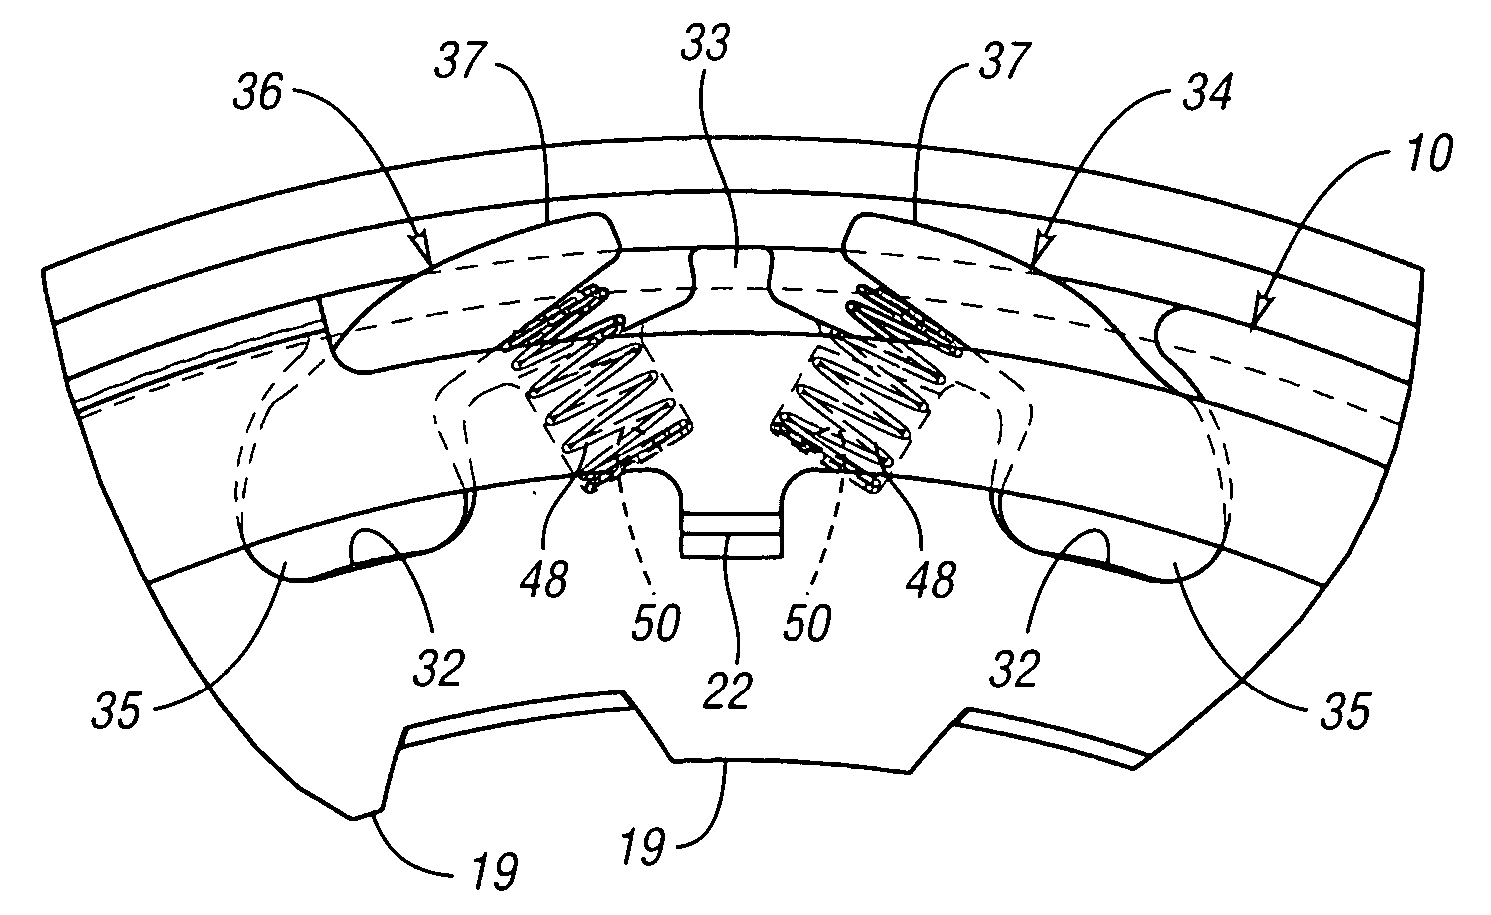 Overrunning radial coupling assembly and method for controlling the engagement of inner and outer members of the assembly